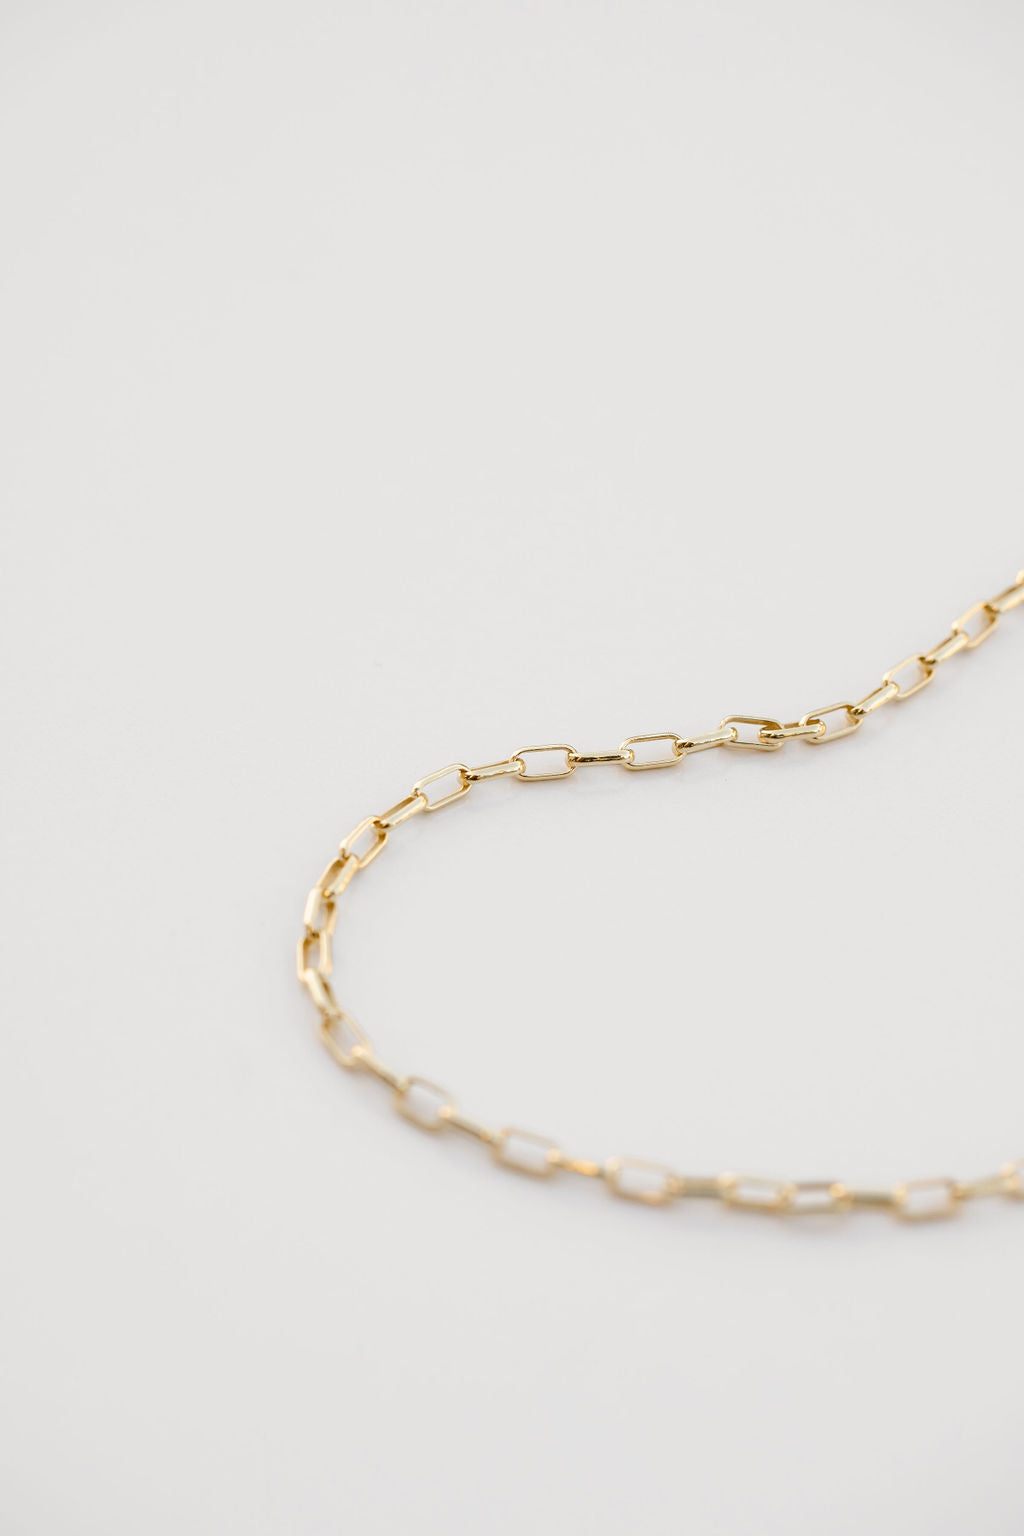 gold paperclip link chain necklace